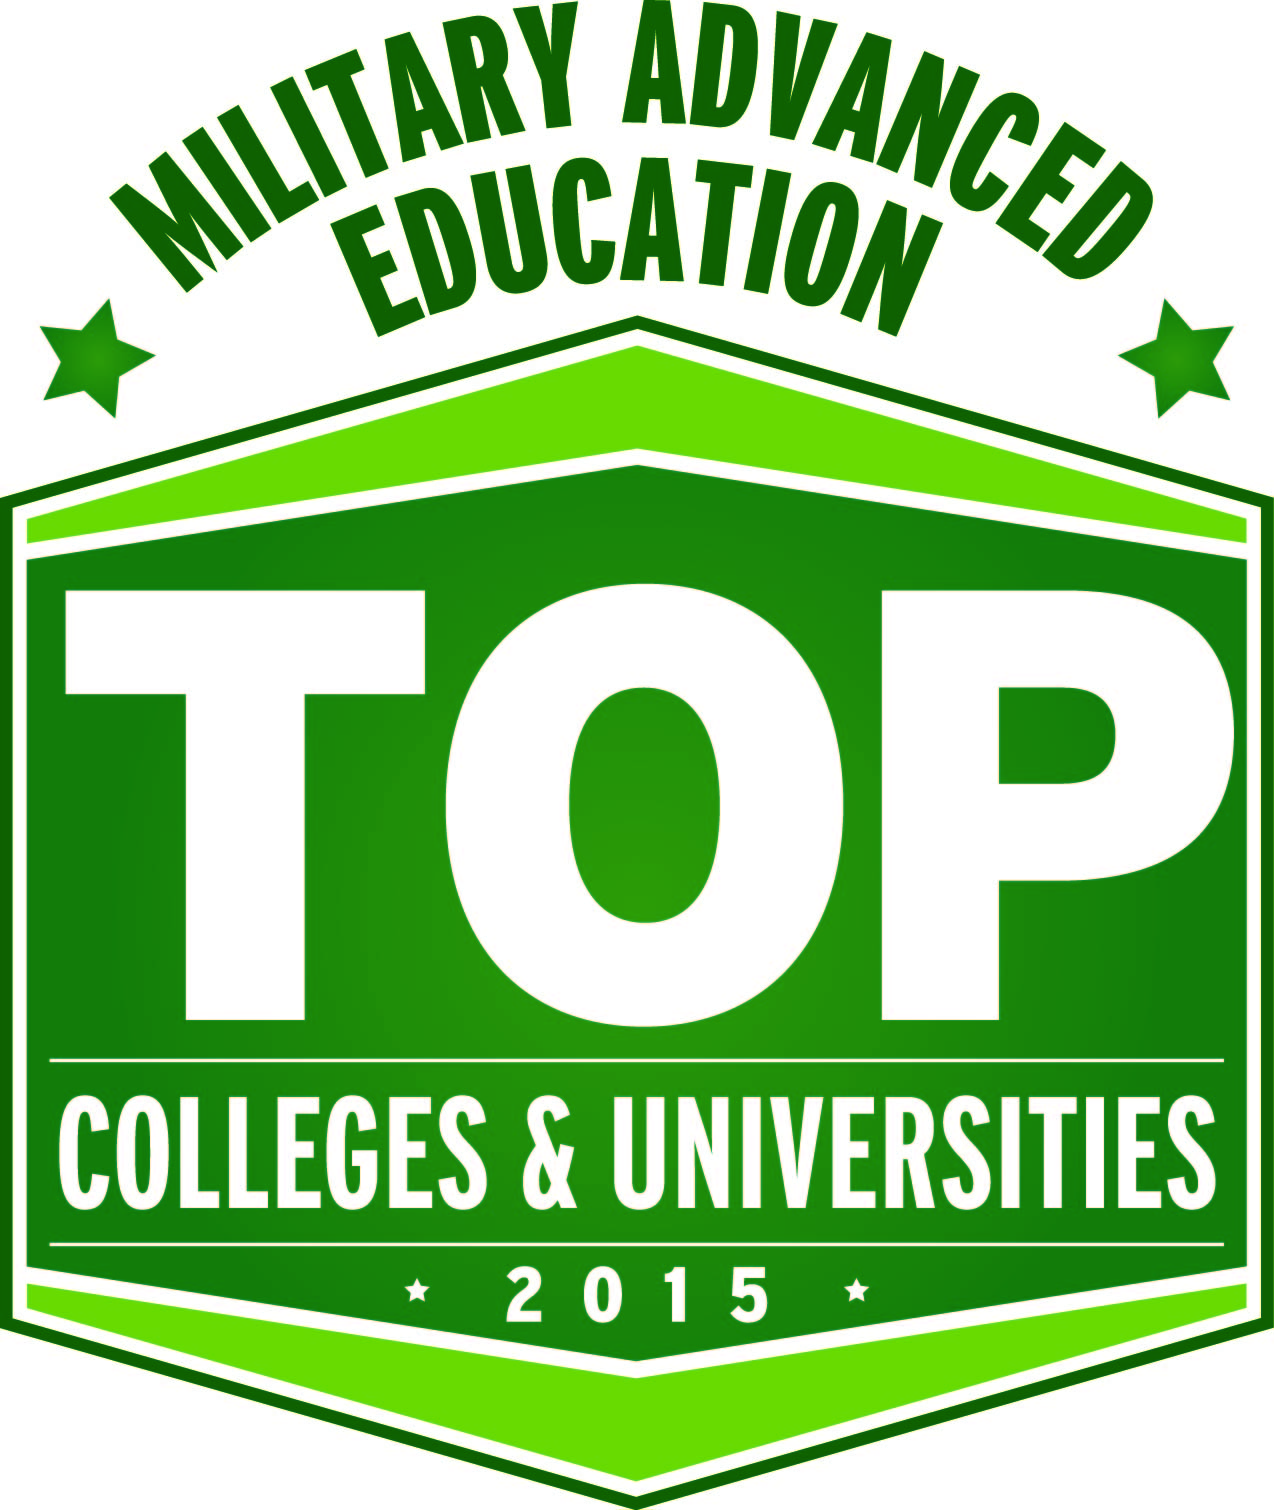 2015 Military Advanced Education's Guide to Colleges & Universities